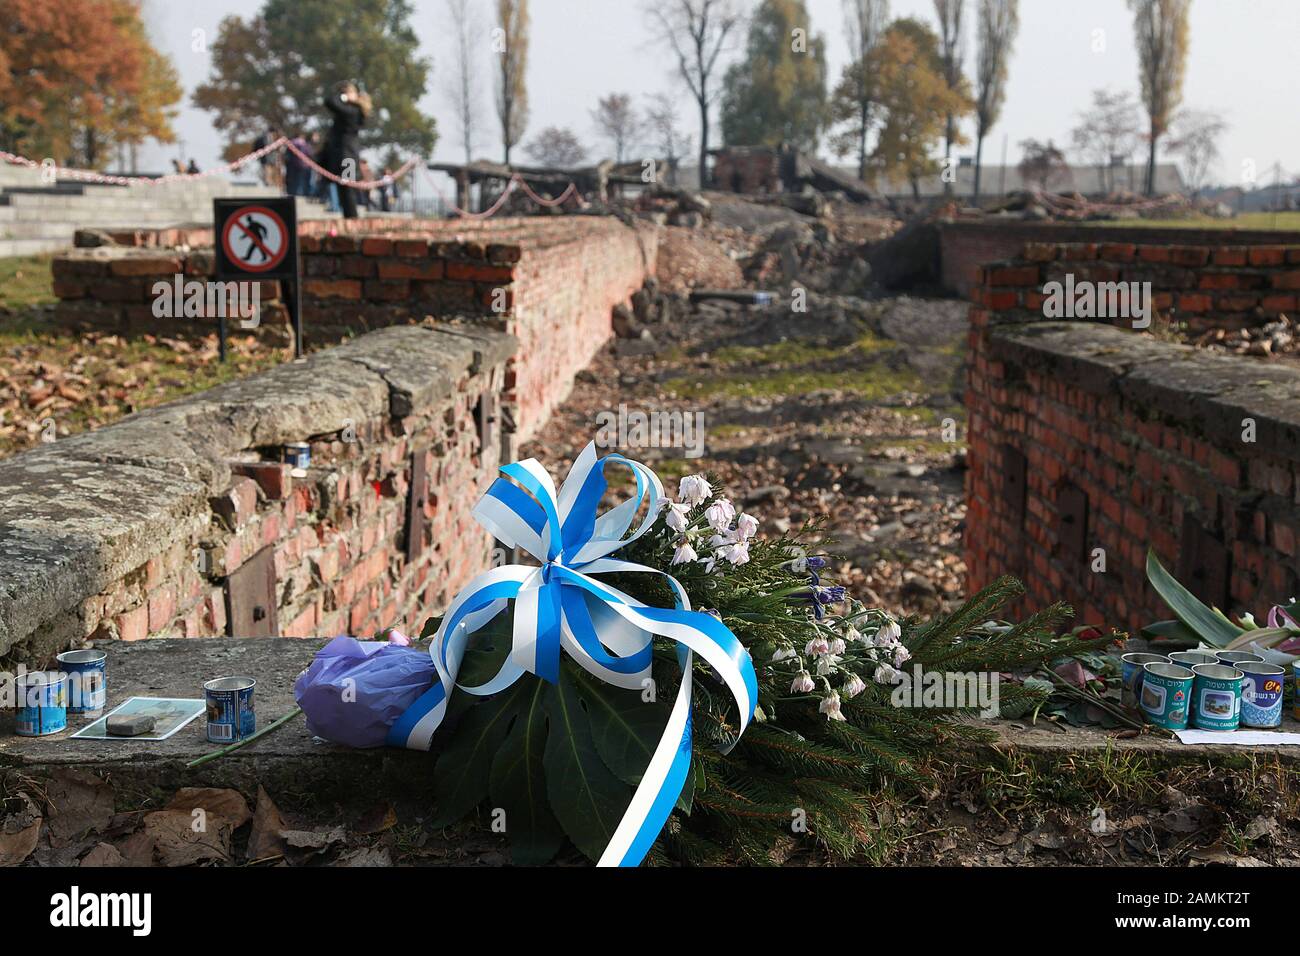 Remains of the gas chambers and crematoria with funeral devotional objects on the site of the memorial in the former concentration camp Auschwitz - Birkenau. [automated translation] Stock Photo